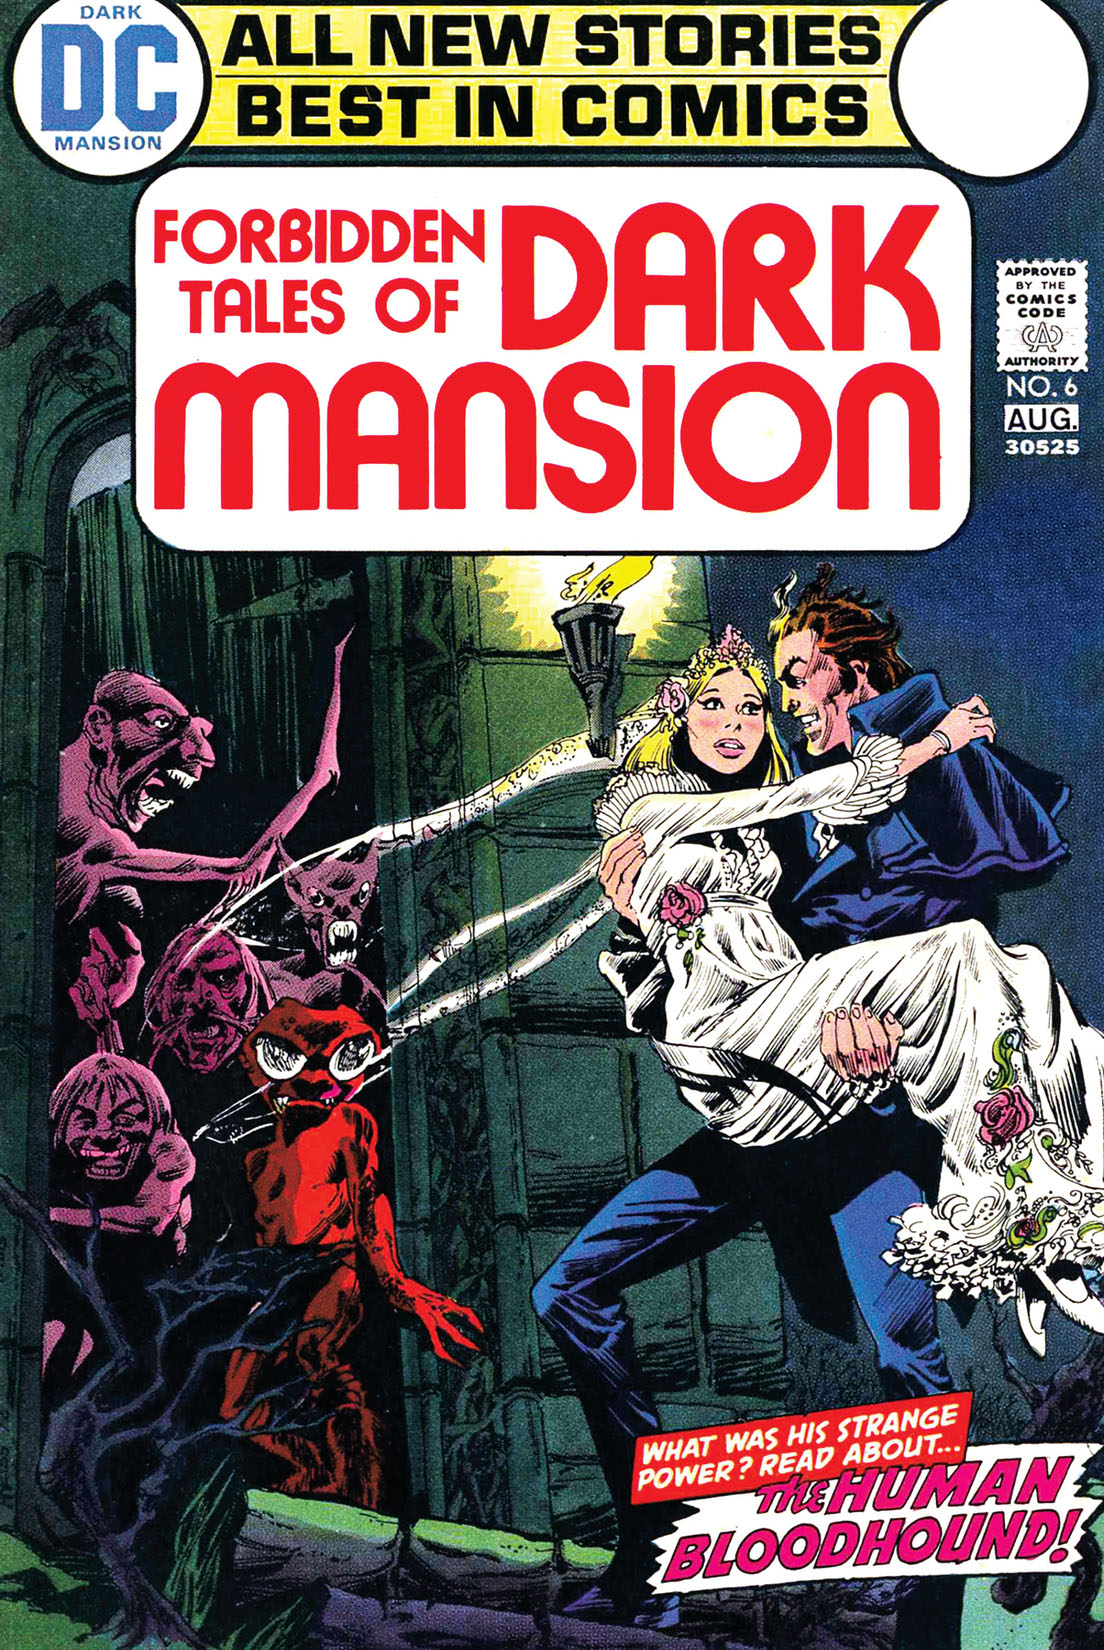 Forbidden Tales of Dark Mansion #6 preview images